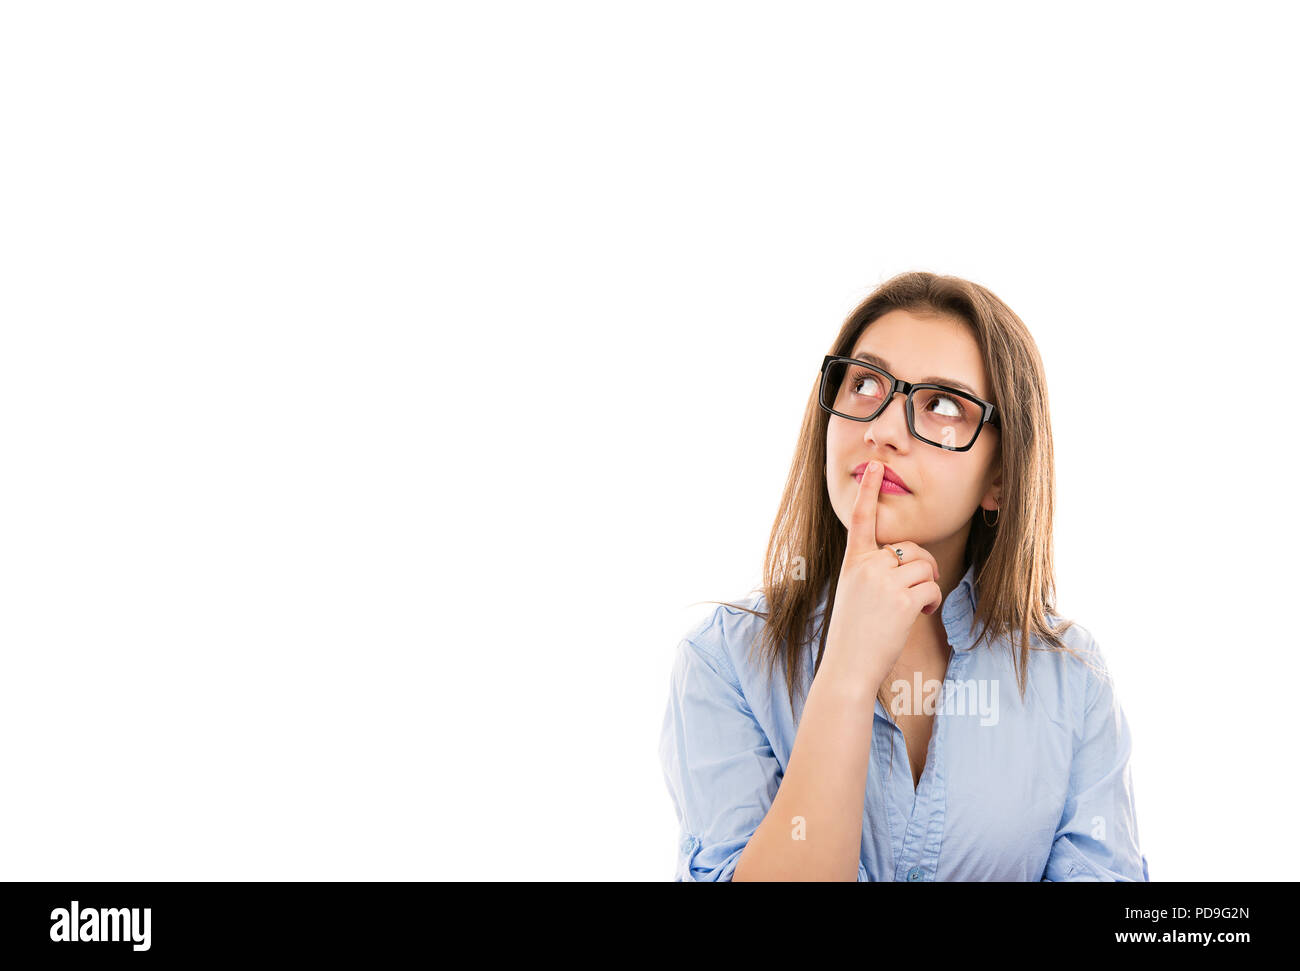 Young thinking woman in glasses touching lips and looking up contemplating on idea isolated on white background Stock Photo